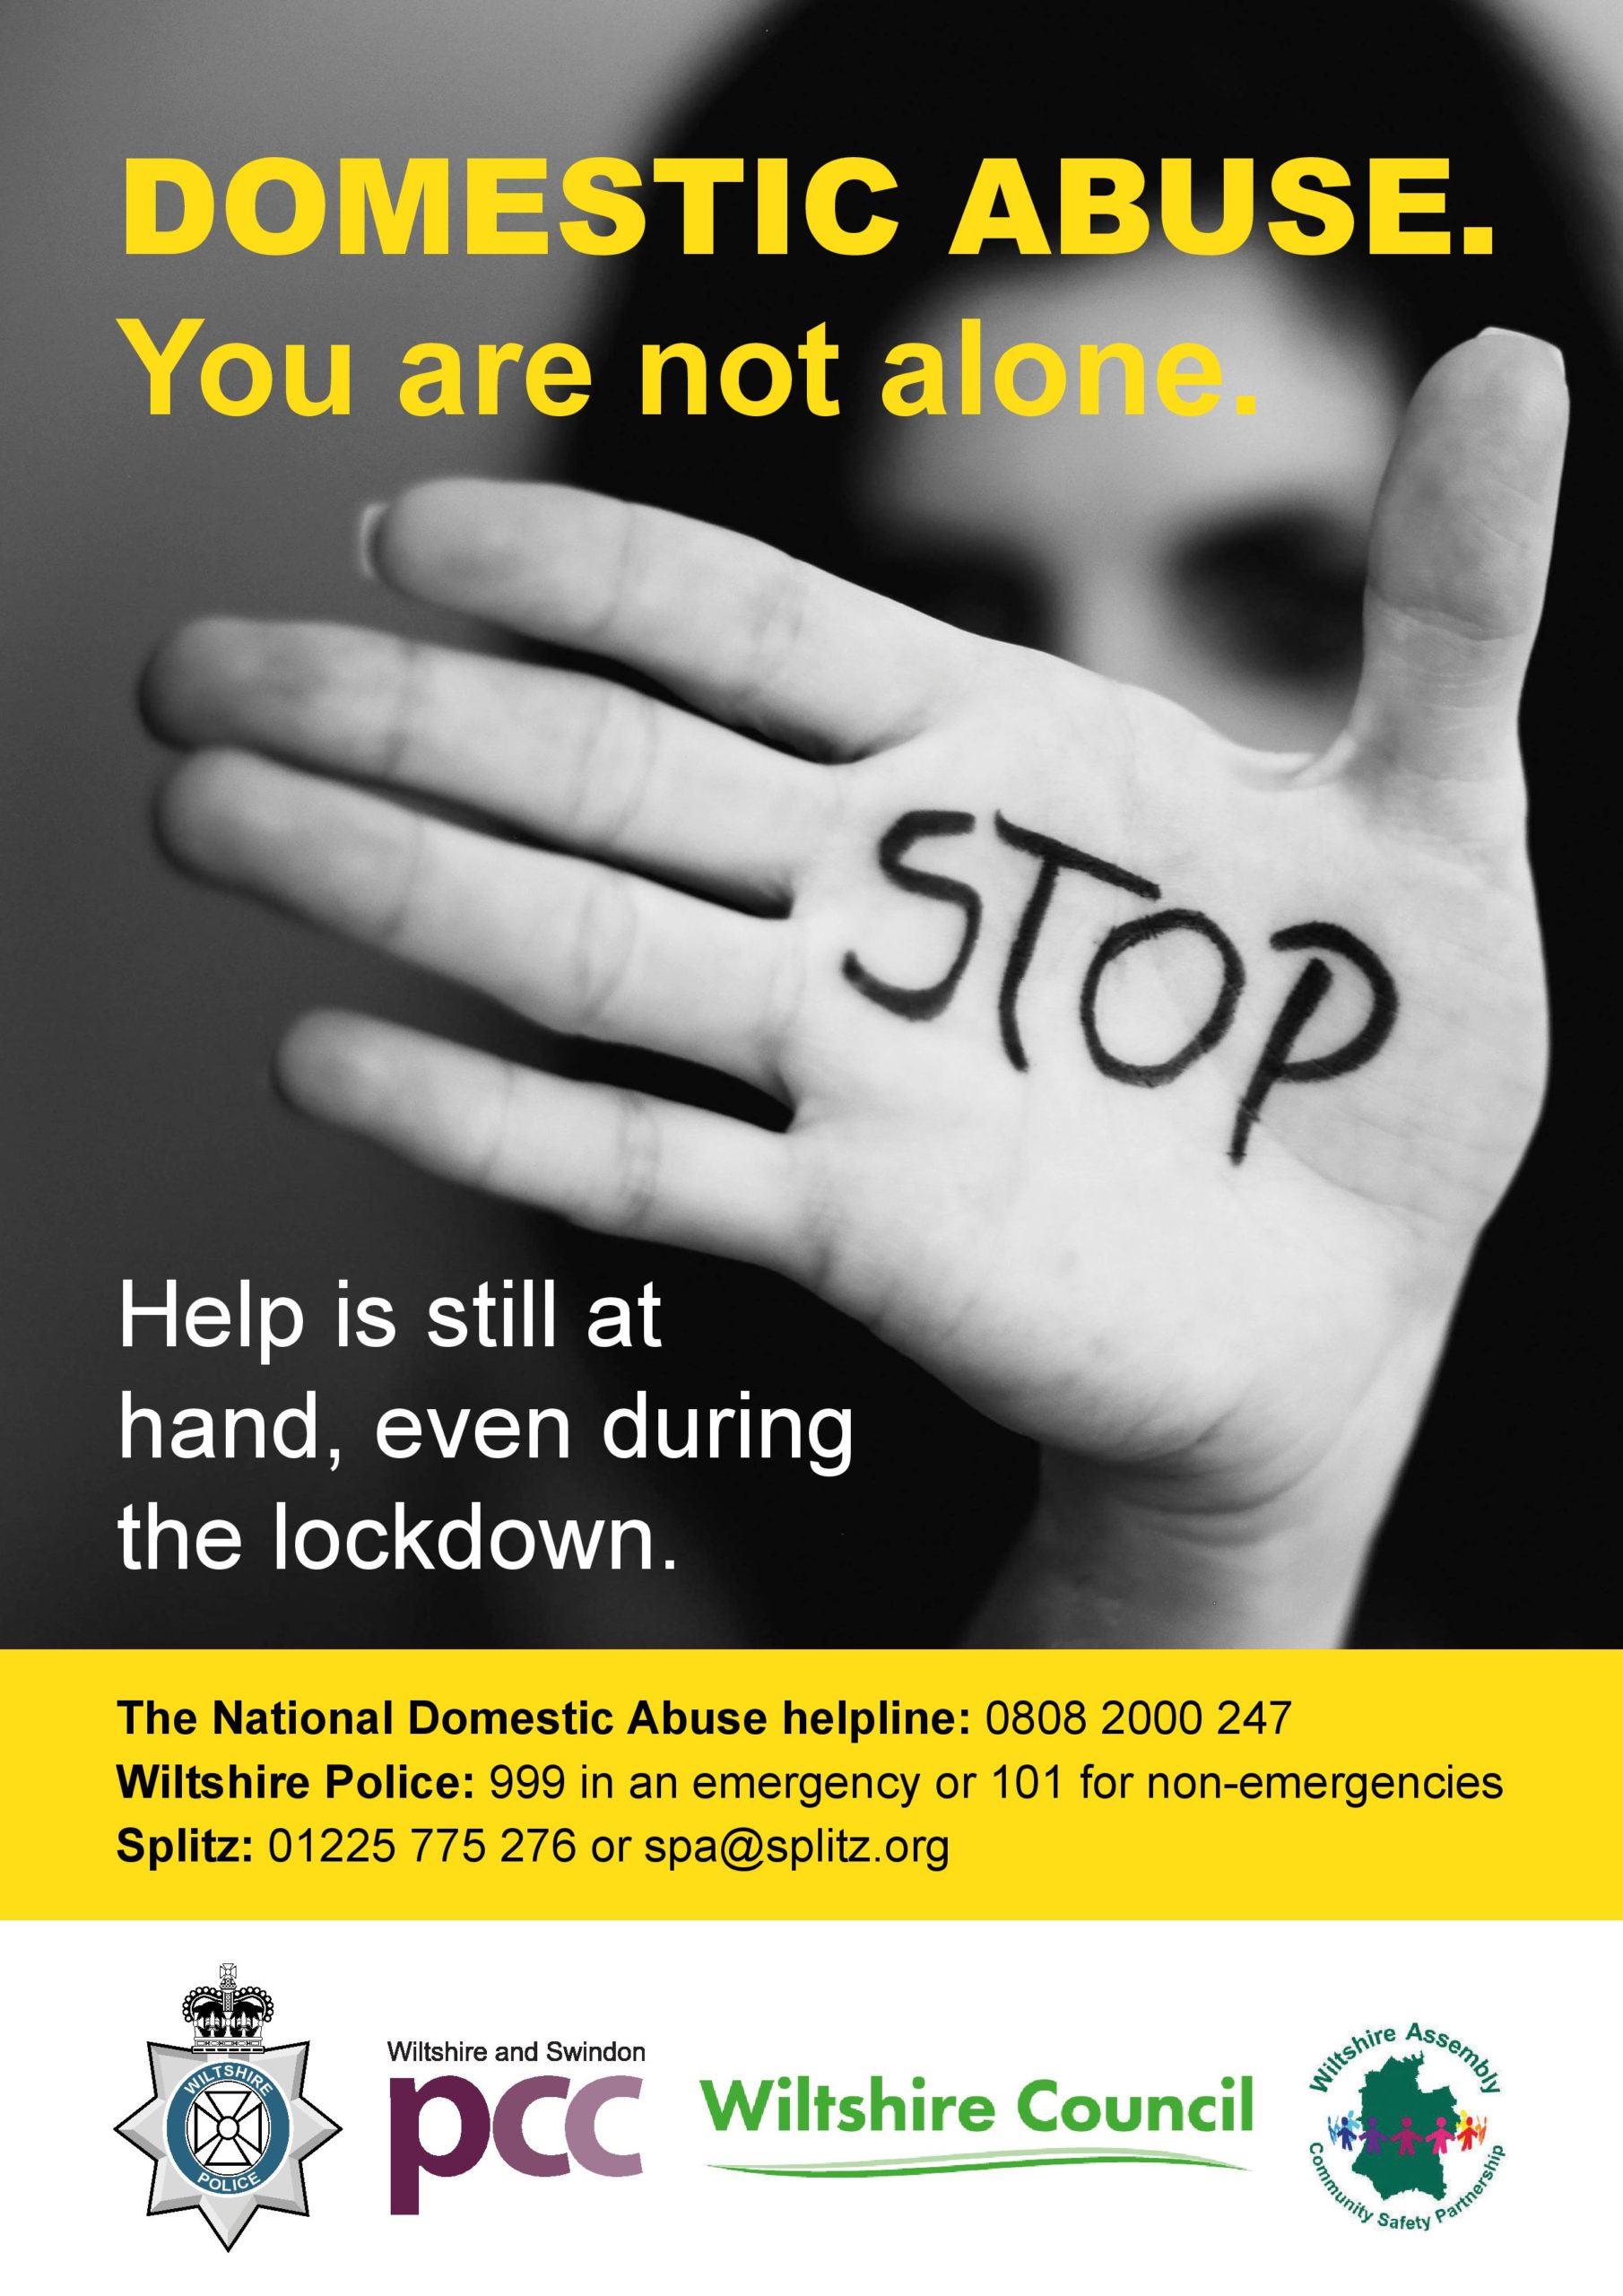 Domestic abuse posters_2020_Wiltshire_1 Hathaway Medical Centre